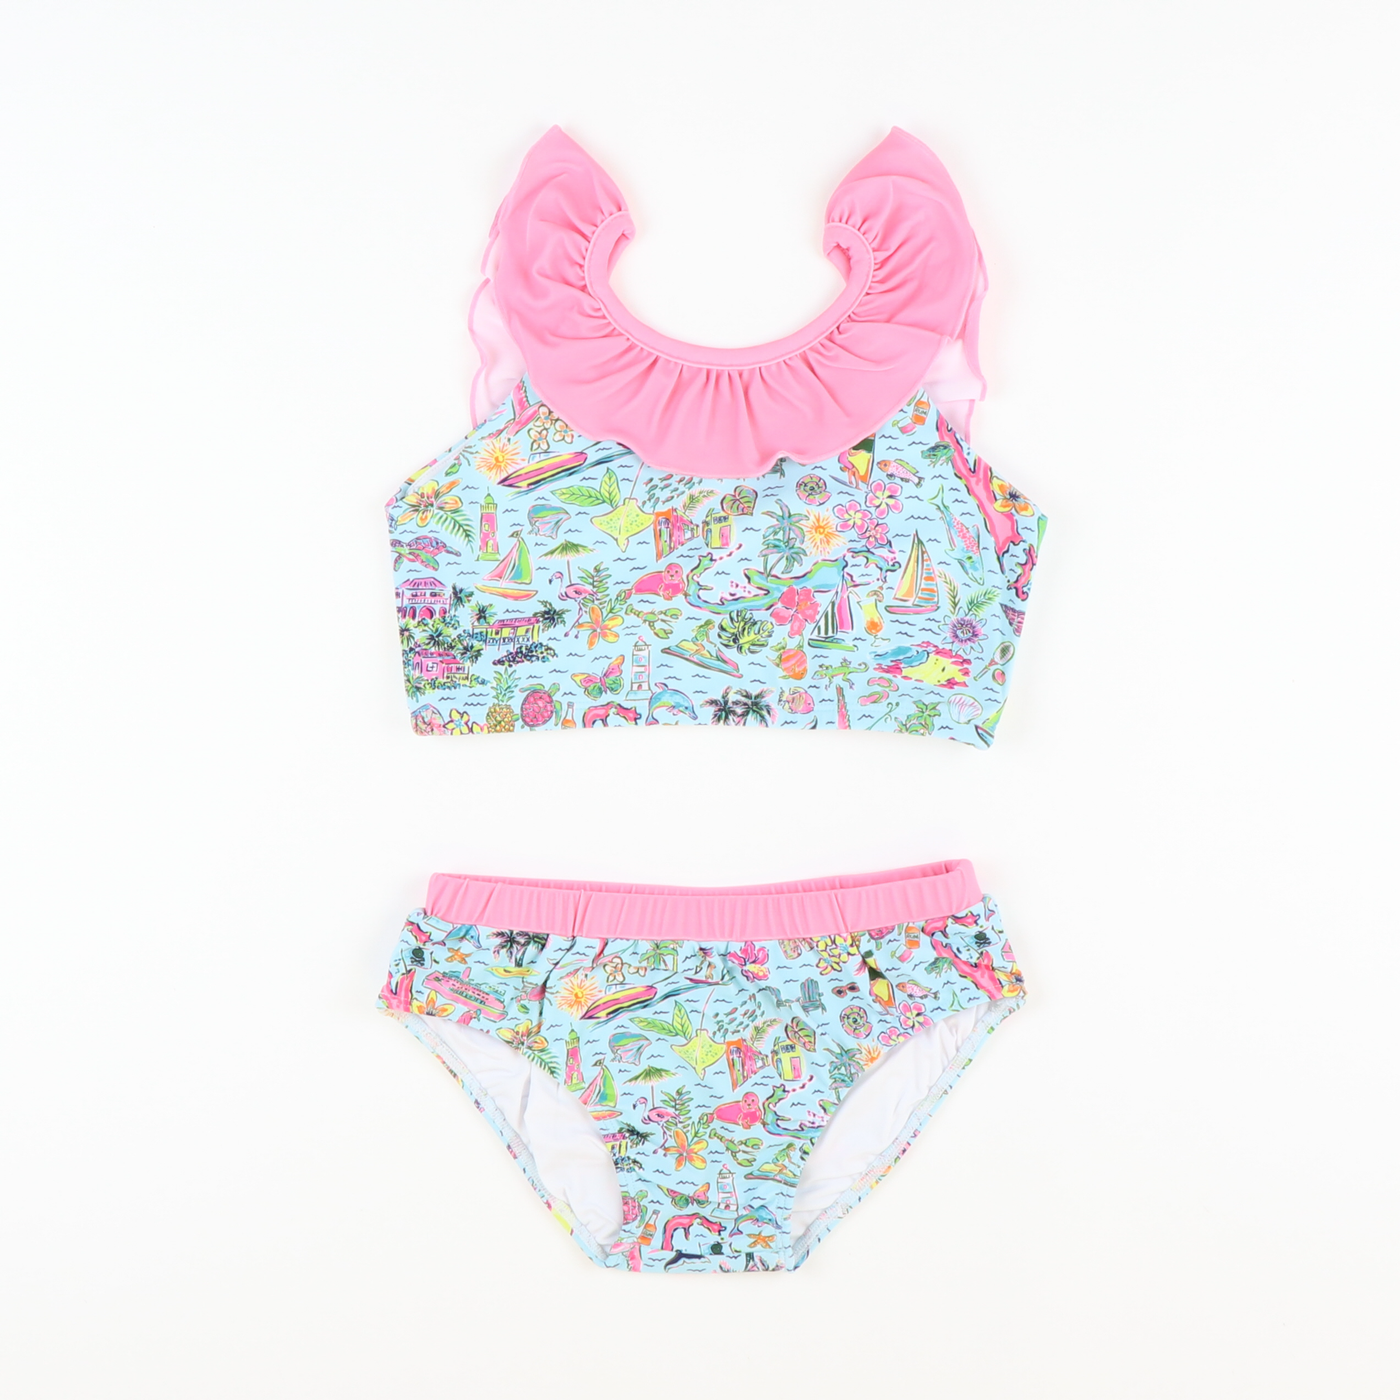 Stellybelly | Classic children's clothing with playful charm.